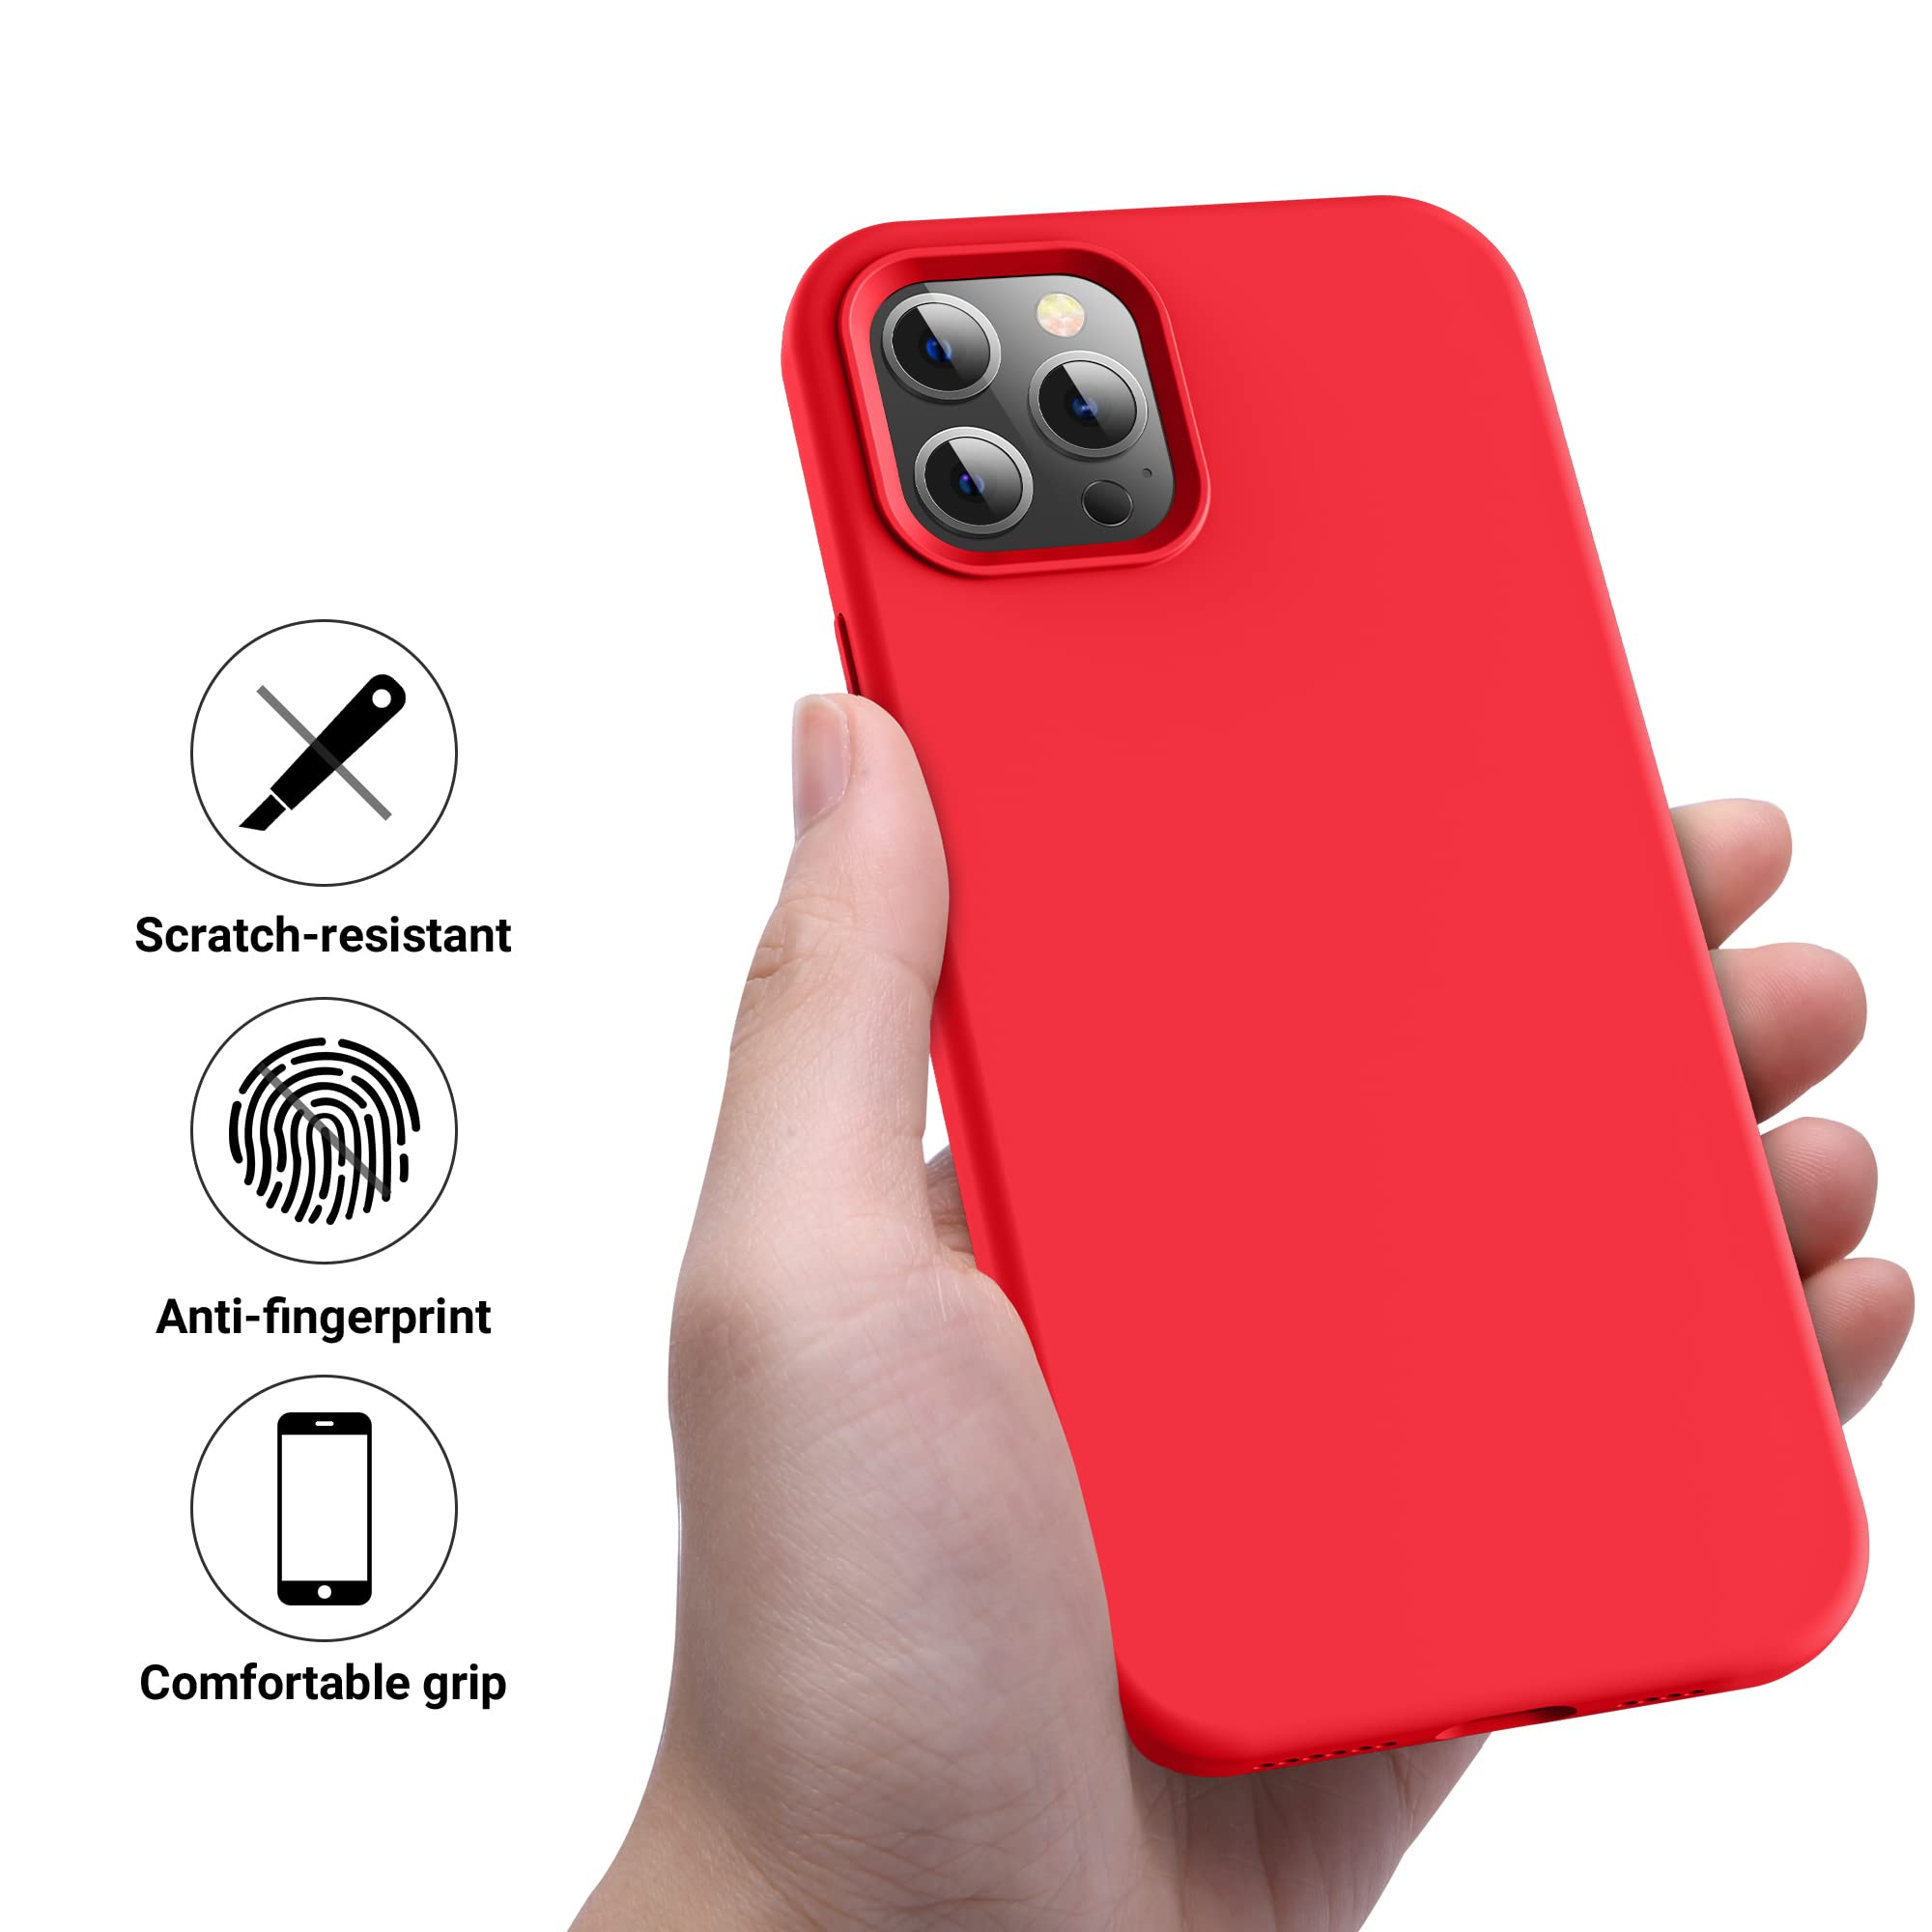 OTOFLY Compatible with iPhone 12 Pro Max Case 6.7 inch(2020),[Silky and Soft Touch Series] Premium Soft Liquid Silicone Rubber Full-Body Protective Bumper Case (Red)